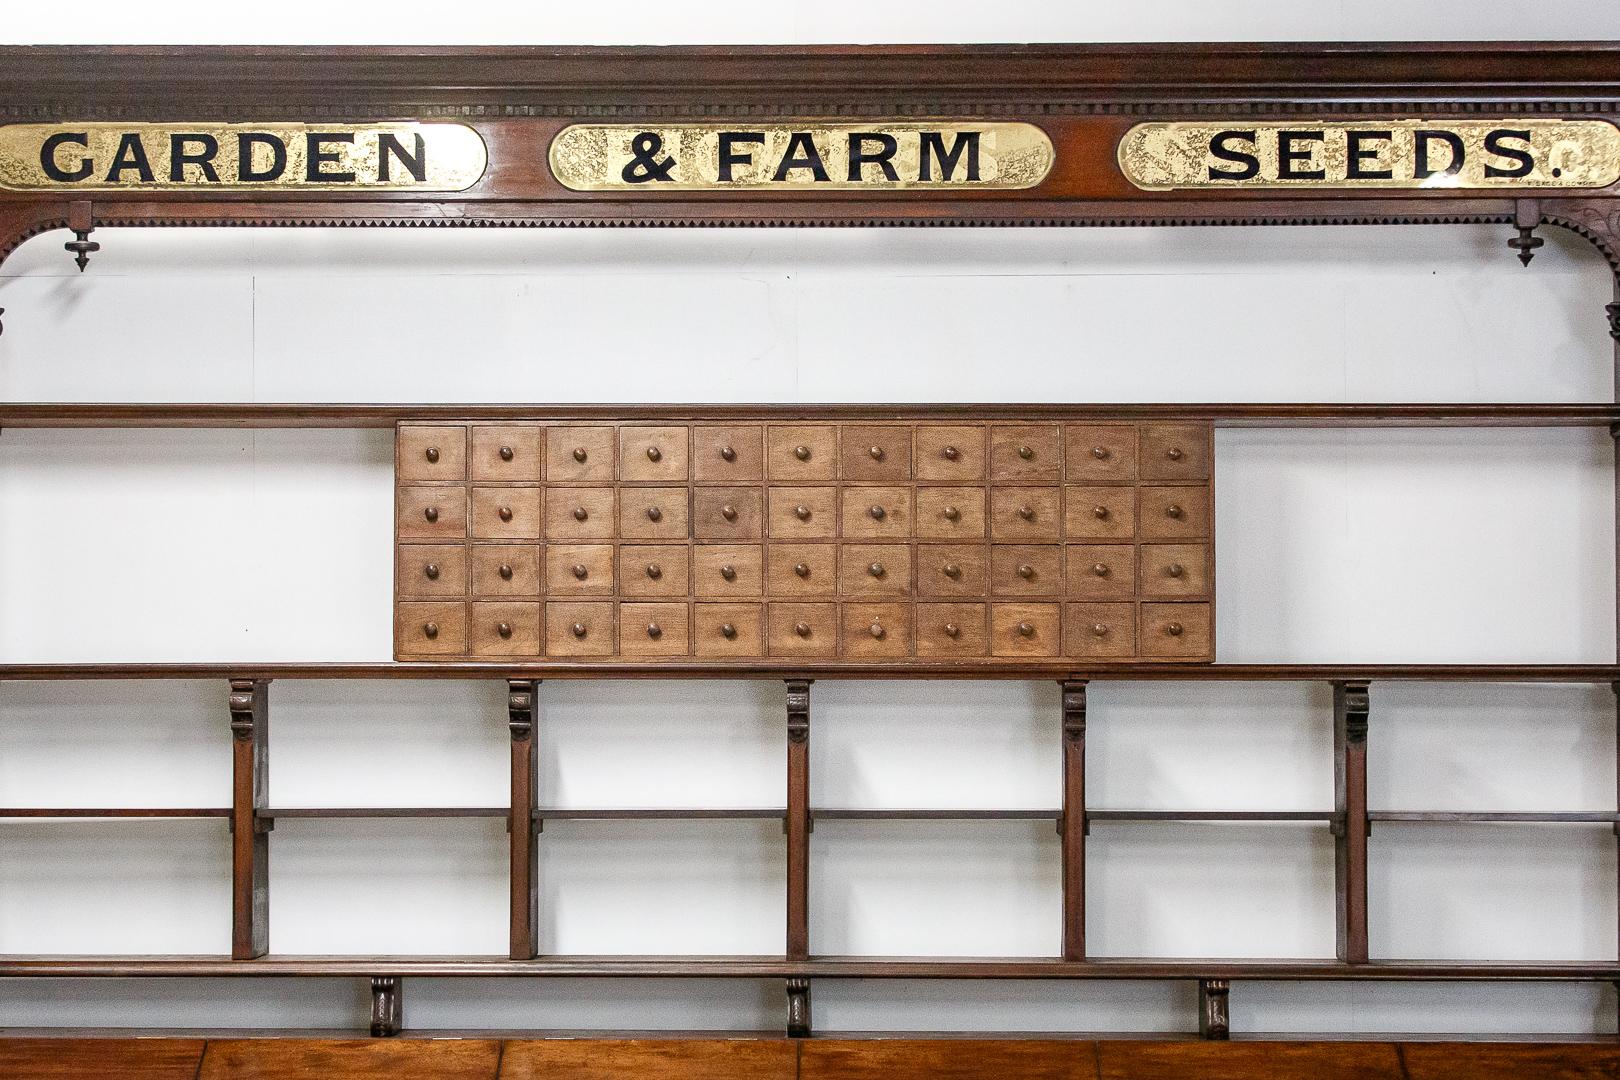 A truly spectacular English seed merchants point of sale dresser. Vast scale, reverse glass painted signage, signed F Sage and company. Intricately carved decoration throughout. Standing on a bank or 24 drawers above which sit 6 original zinc lined